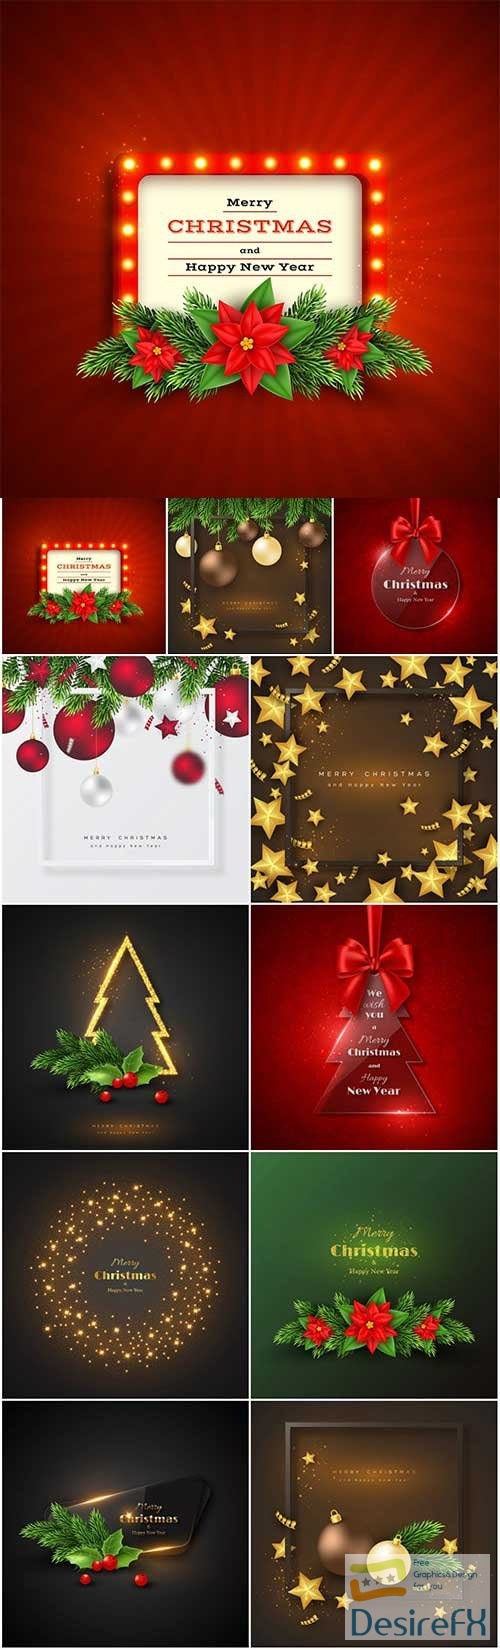 New Year and Christmas vector vol 3